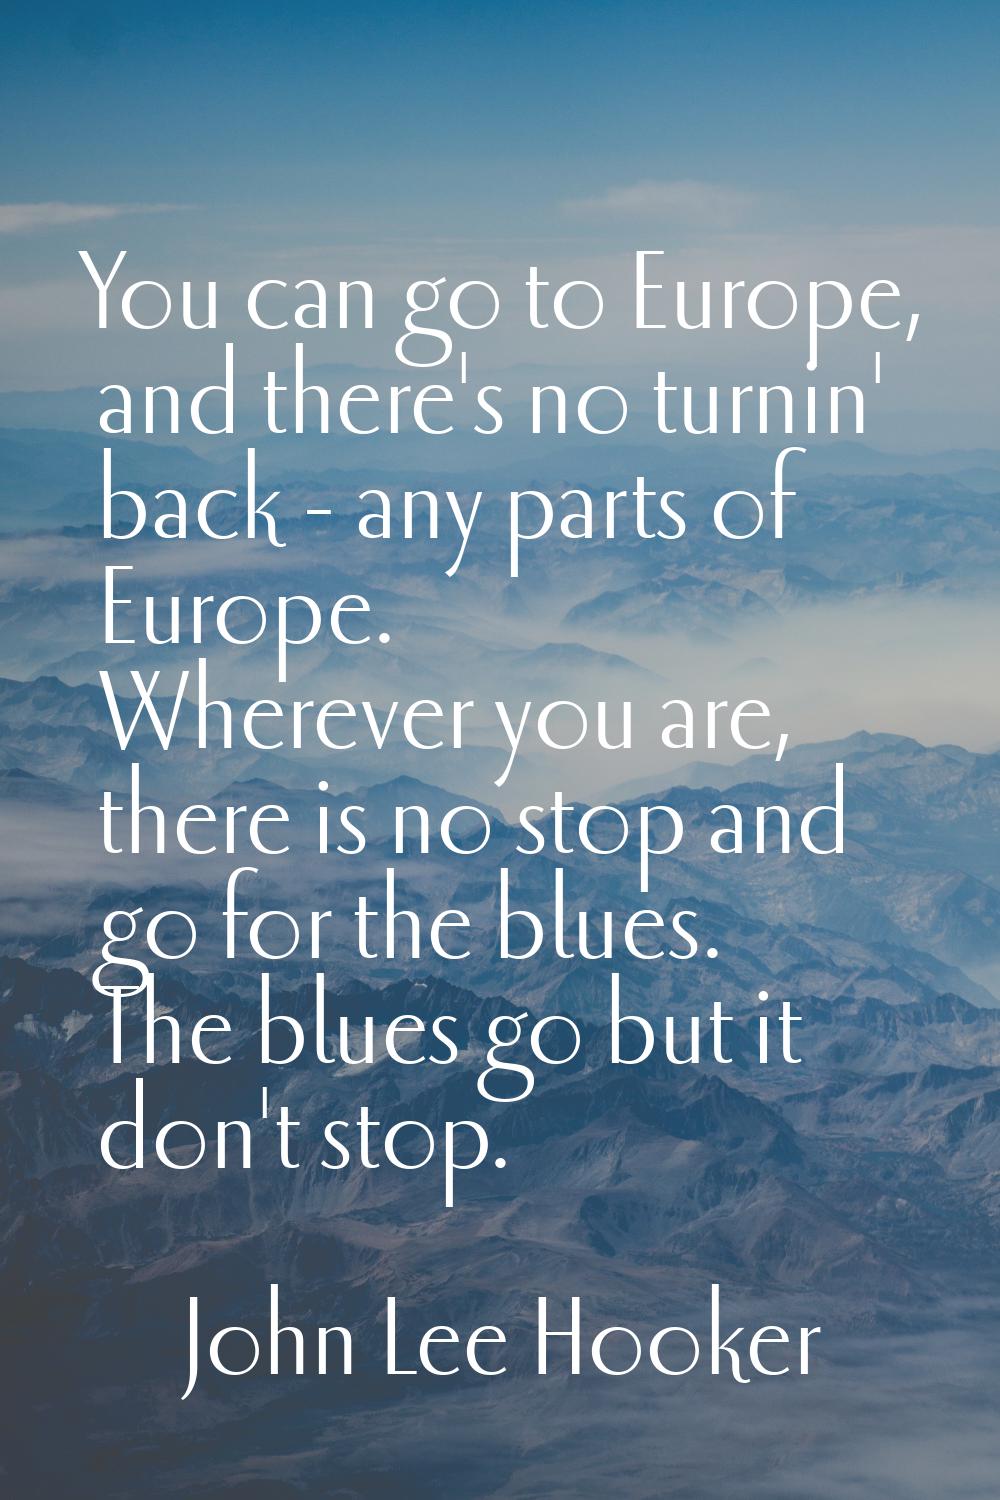 You can go to Europe, and there's no turnin' back - any parts of Europe. Wherever you are, there is